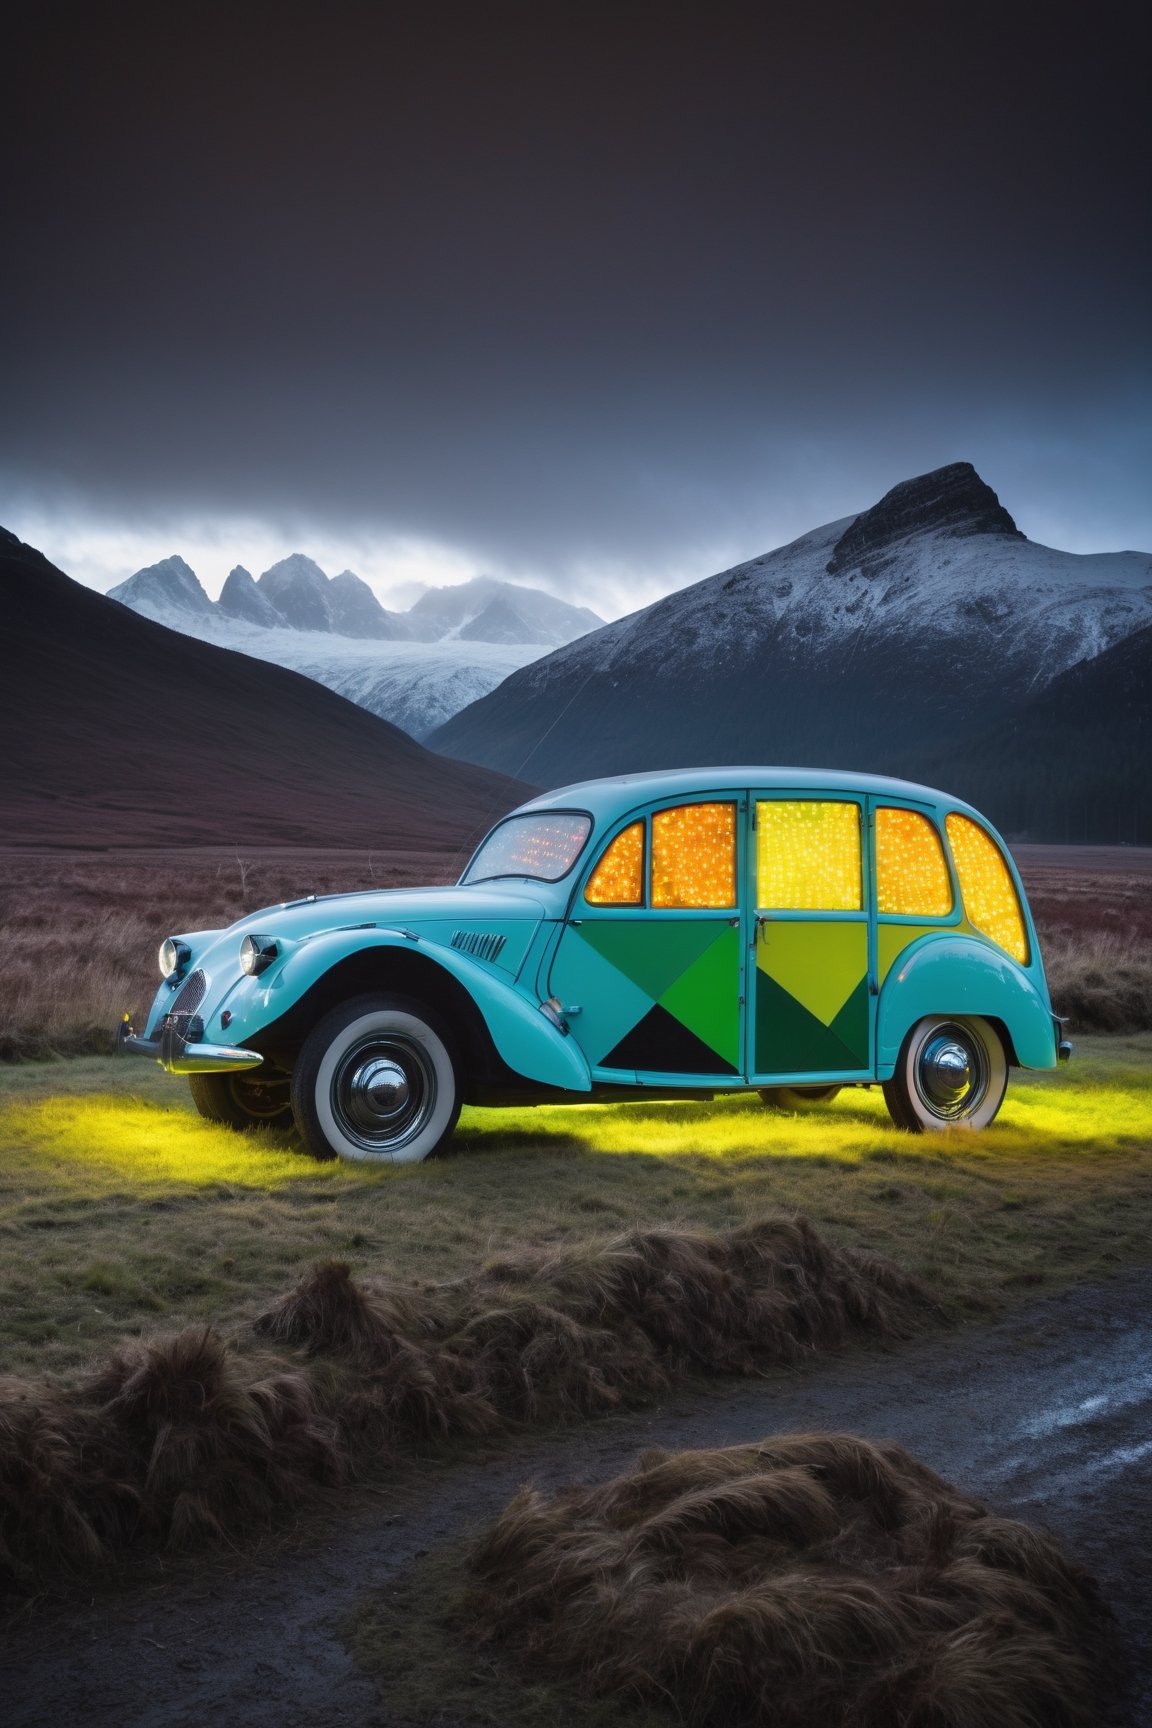 by Tom Fruin, Airbrush painting, landscape of a 1950'S Luminescent (Fen:1.1) and Electric Vehicle, mountains, Foggy conditions, Movie still, back-light, Flickr
